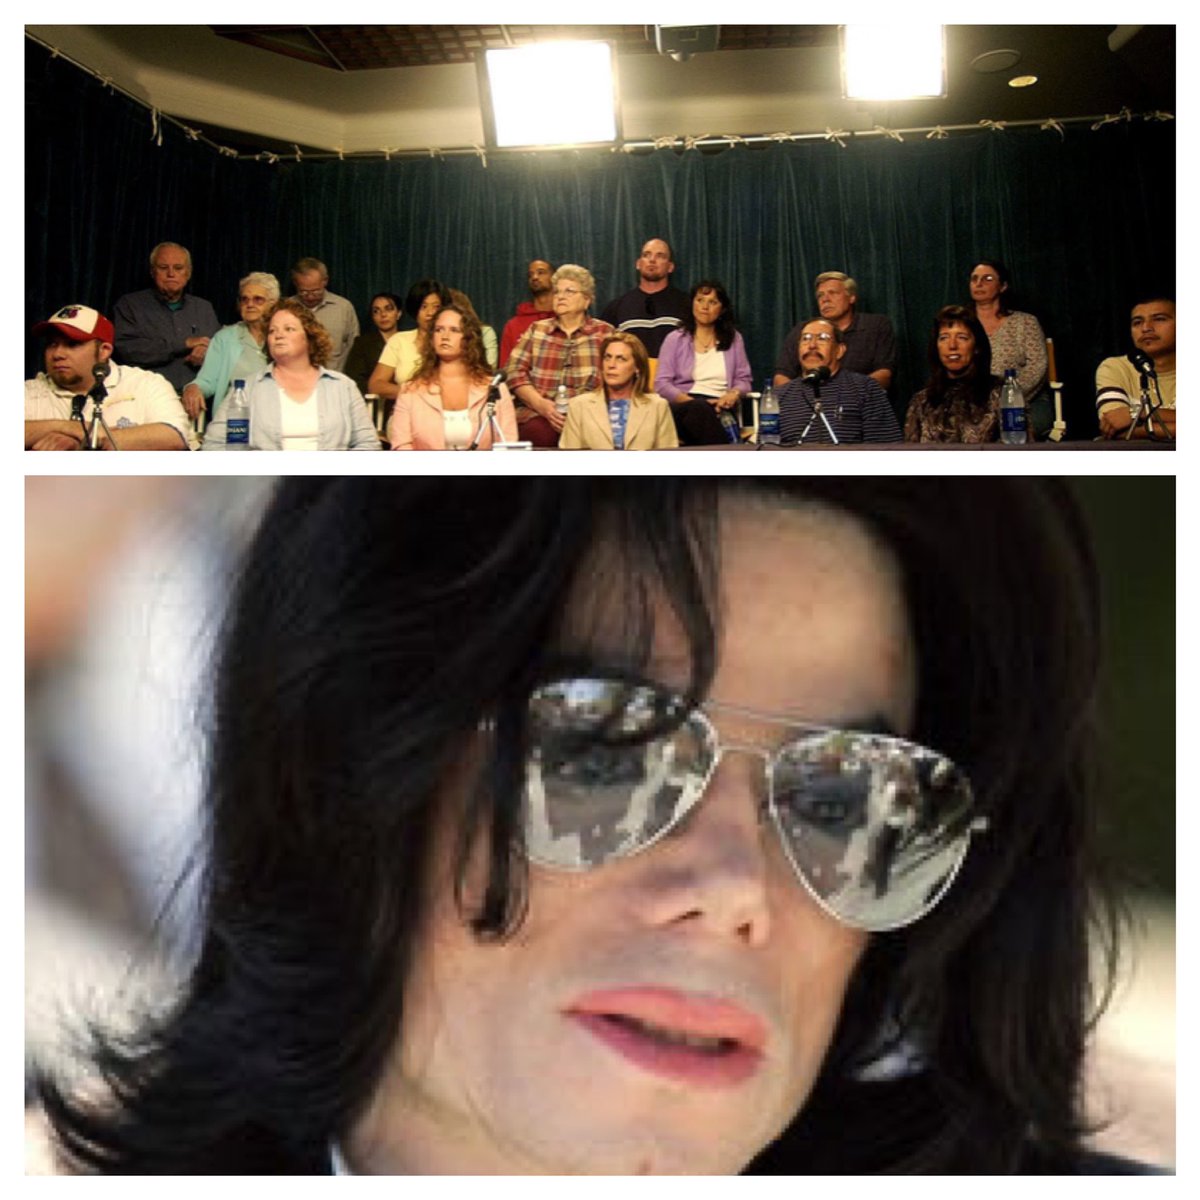 Now compare this to the horrible trial MJ's had to endure in 2005. Look at the jury and the falsely tried and exonerated black man.Nothing more to add!  #MJinnocent Jury pic: Aaron Lambert/AP Photo/ MJ pic: internet, source/ unknown